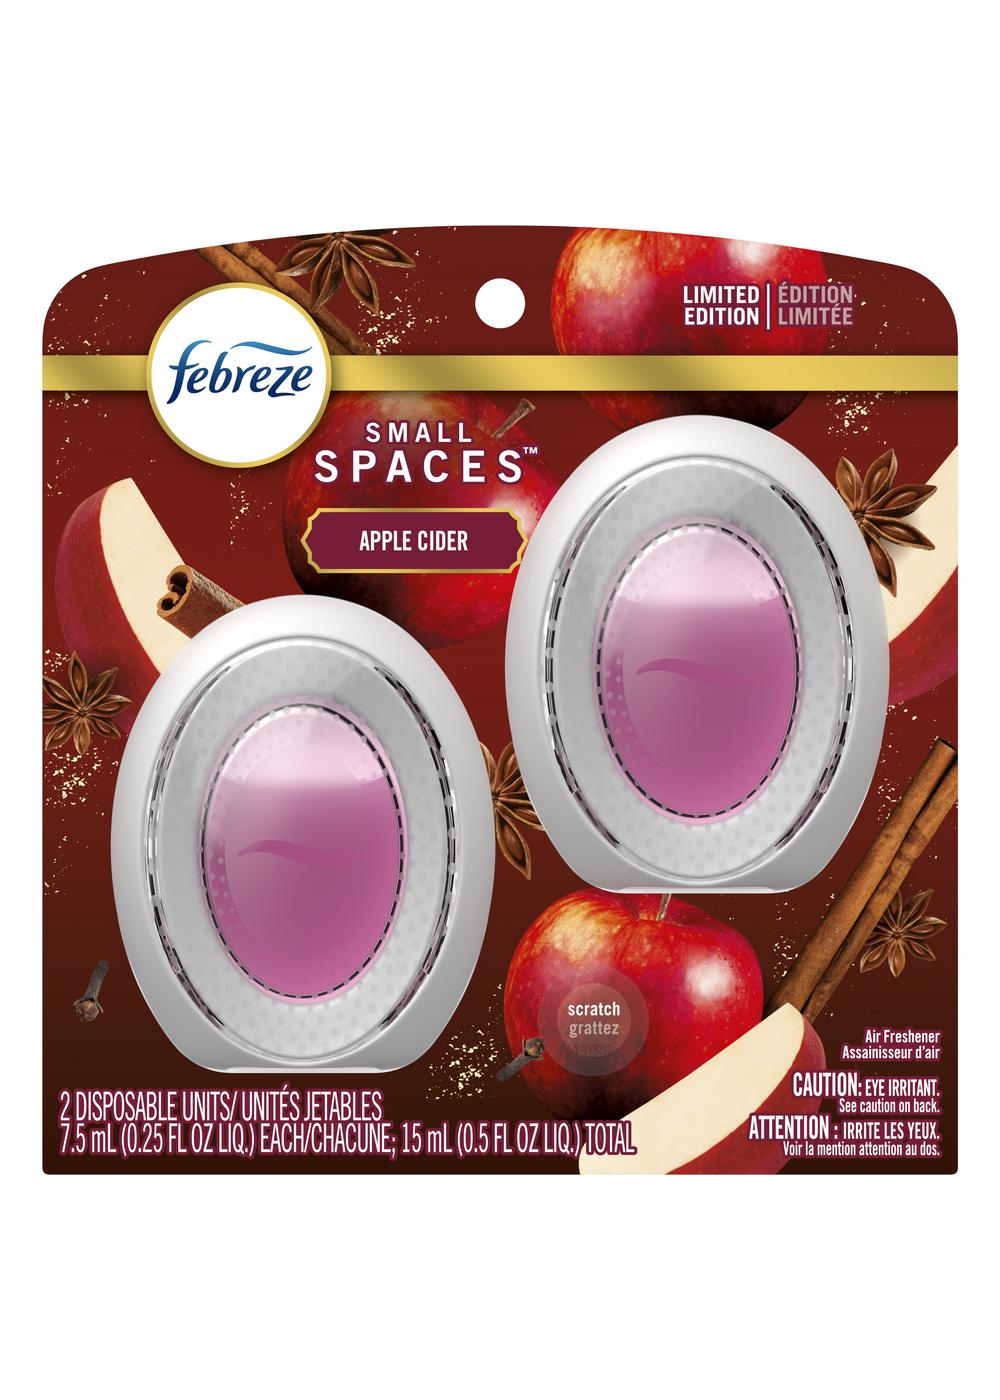 Febreze Odor Fighter Small Spaces Air Freshener - Baked Cinnamon Apples; image 1 of 3